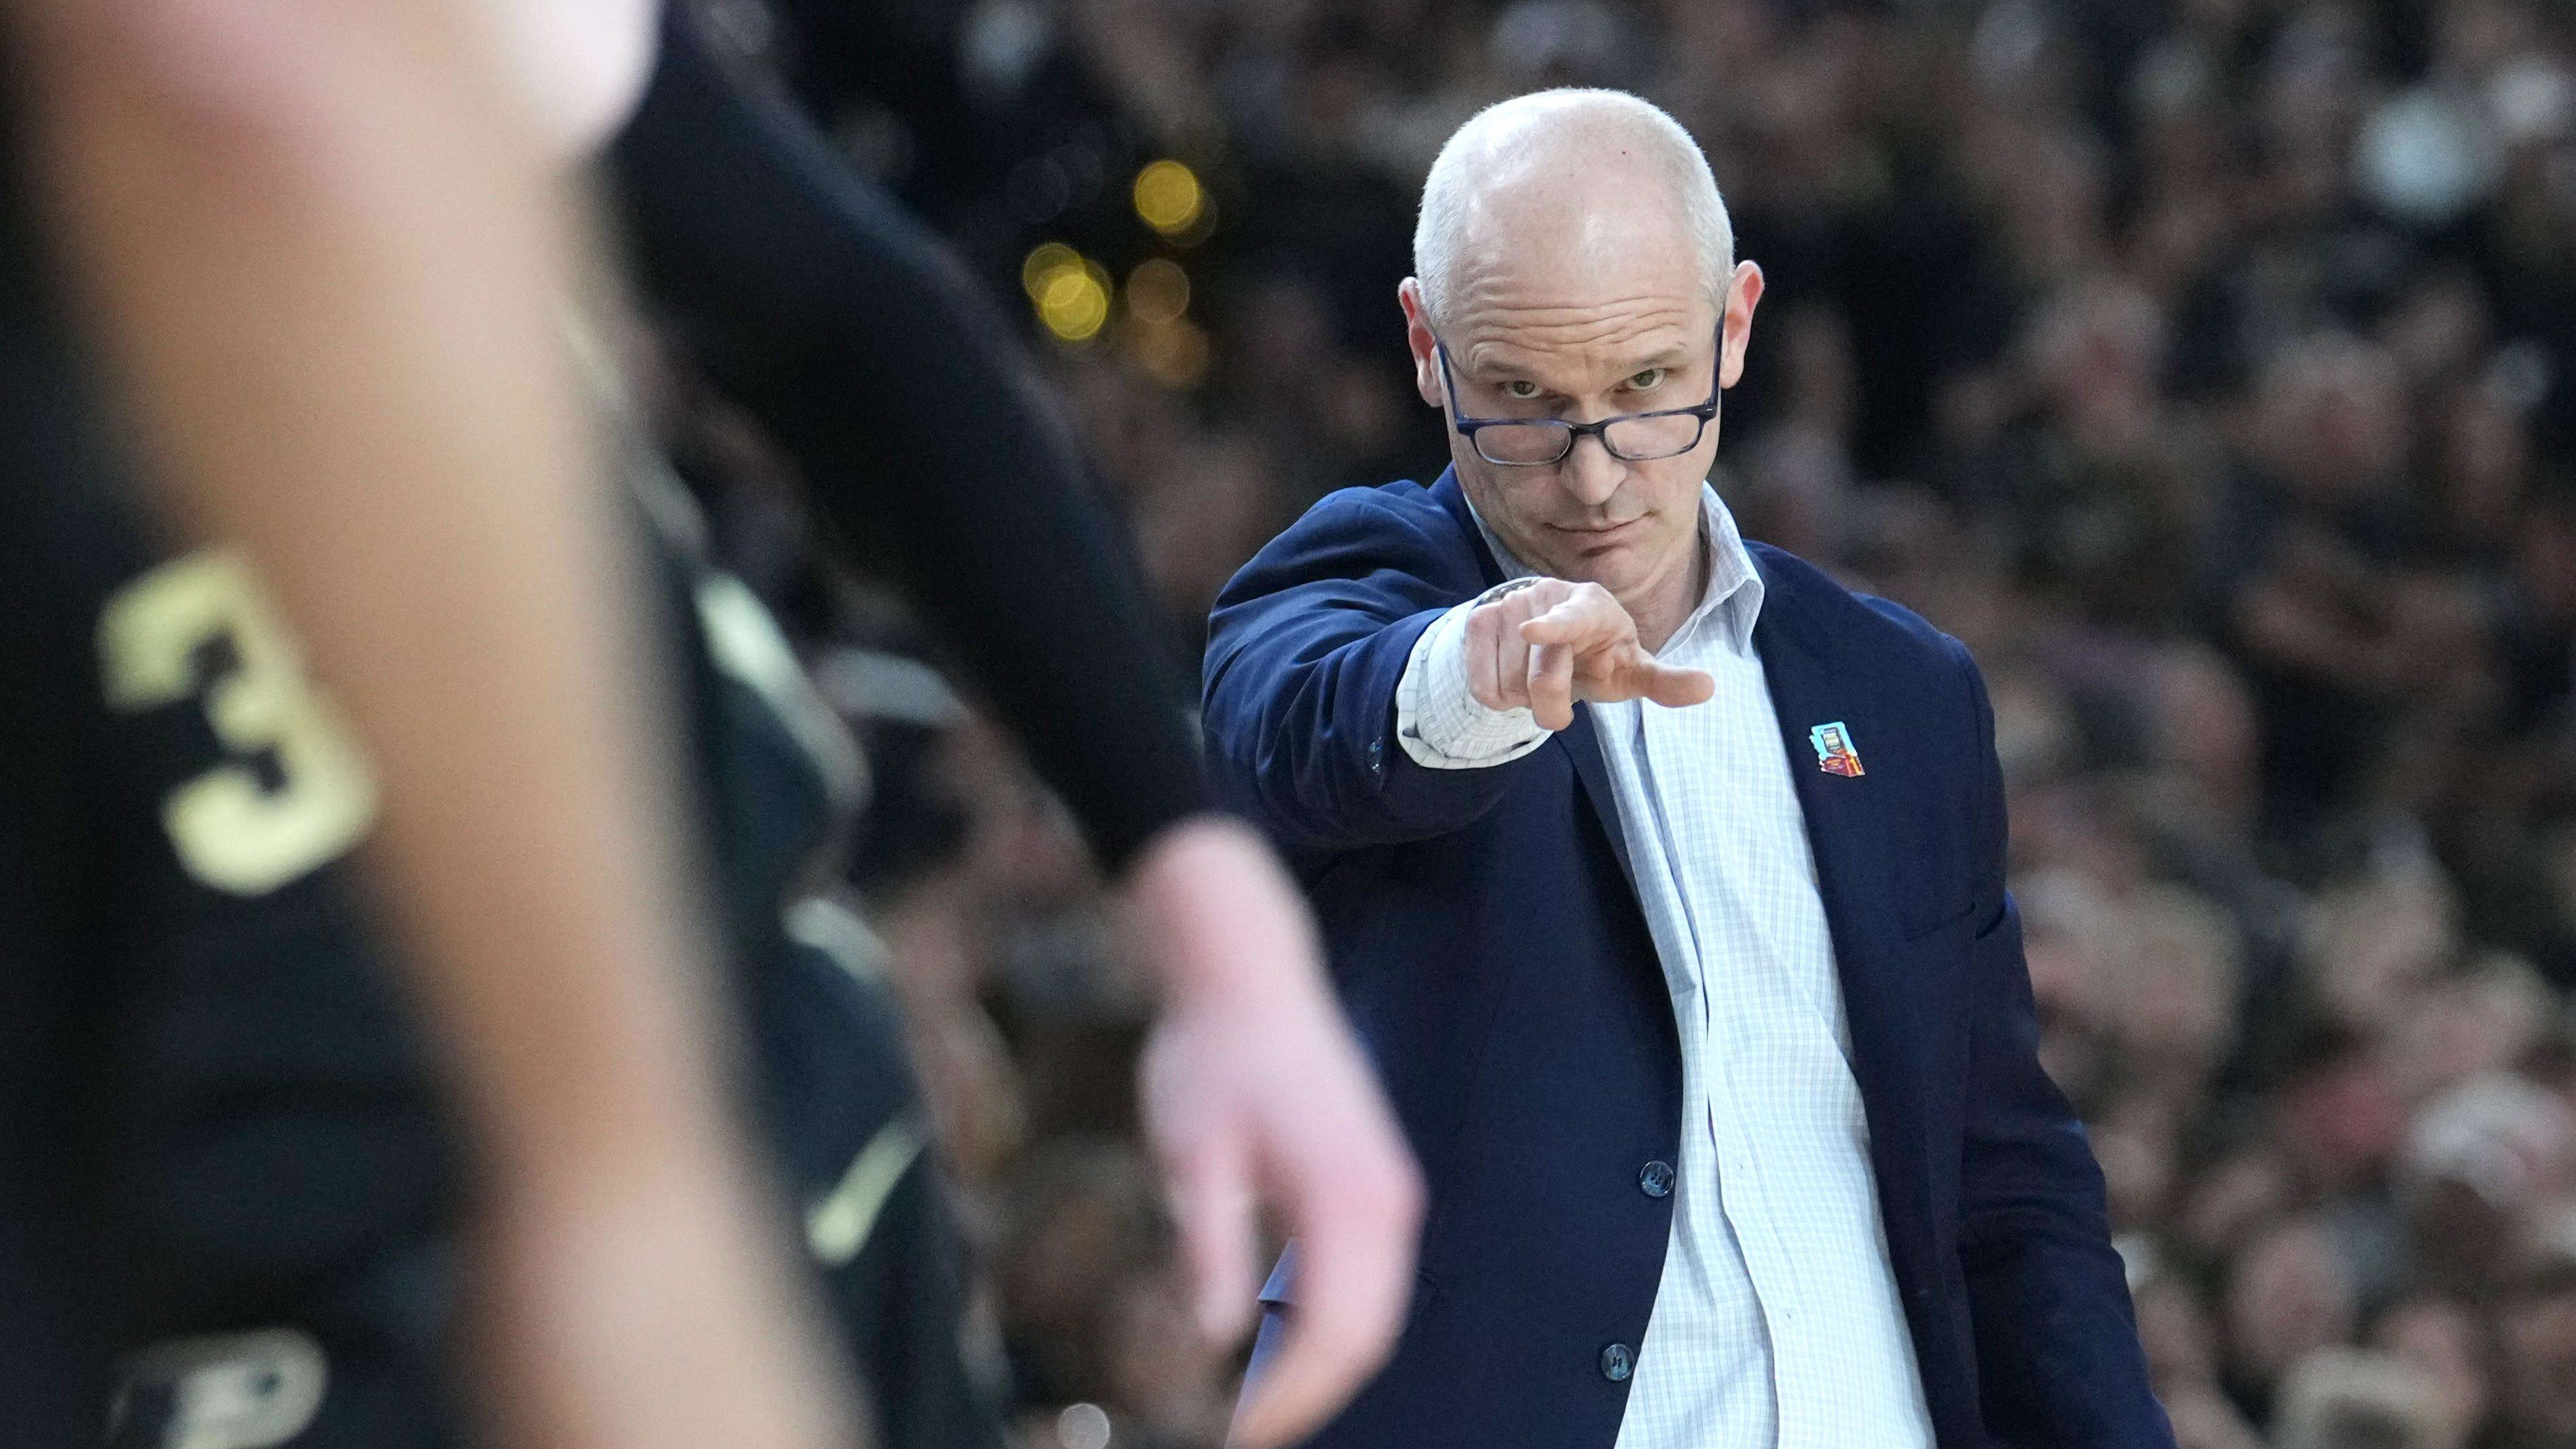 Dan Hurley, whose UConn team won its second straight title, addressed rumors linking him to the Kentucky job.